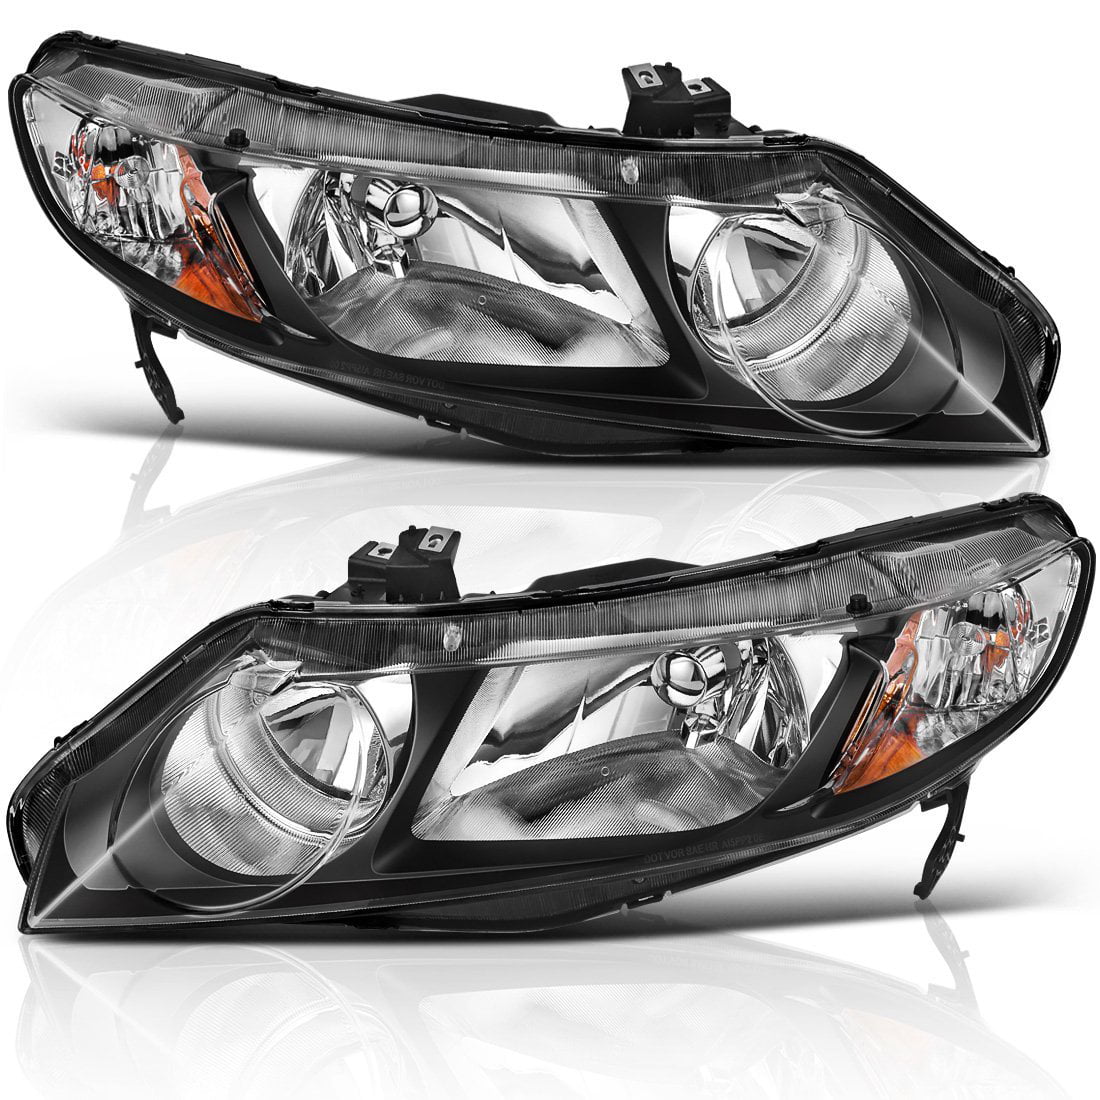 Black Compatible with 2006-2011 Honda Civic 4-Door Sedan Headlight Assembly Pair Clear Lens Replacement Passenger and Driver Side 